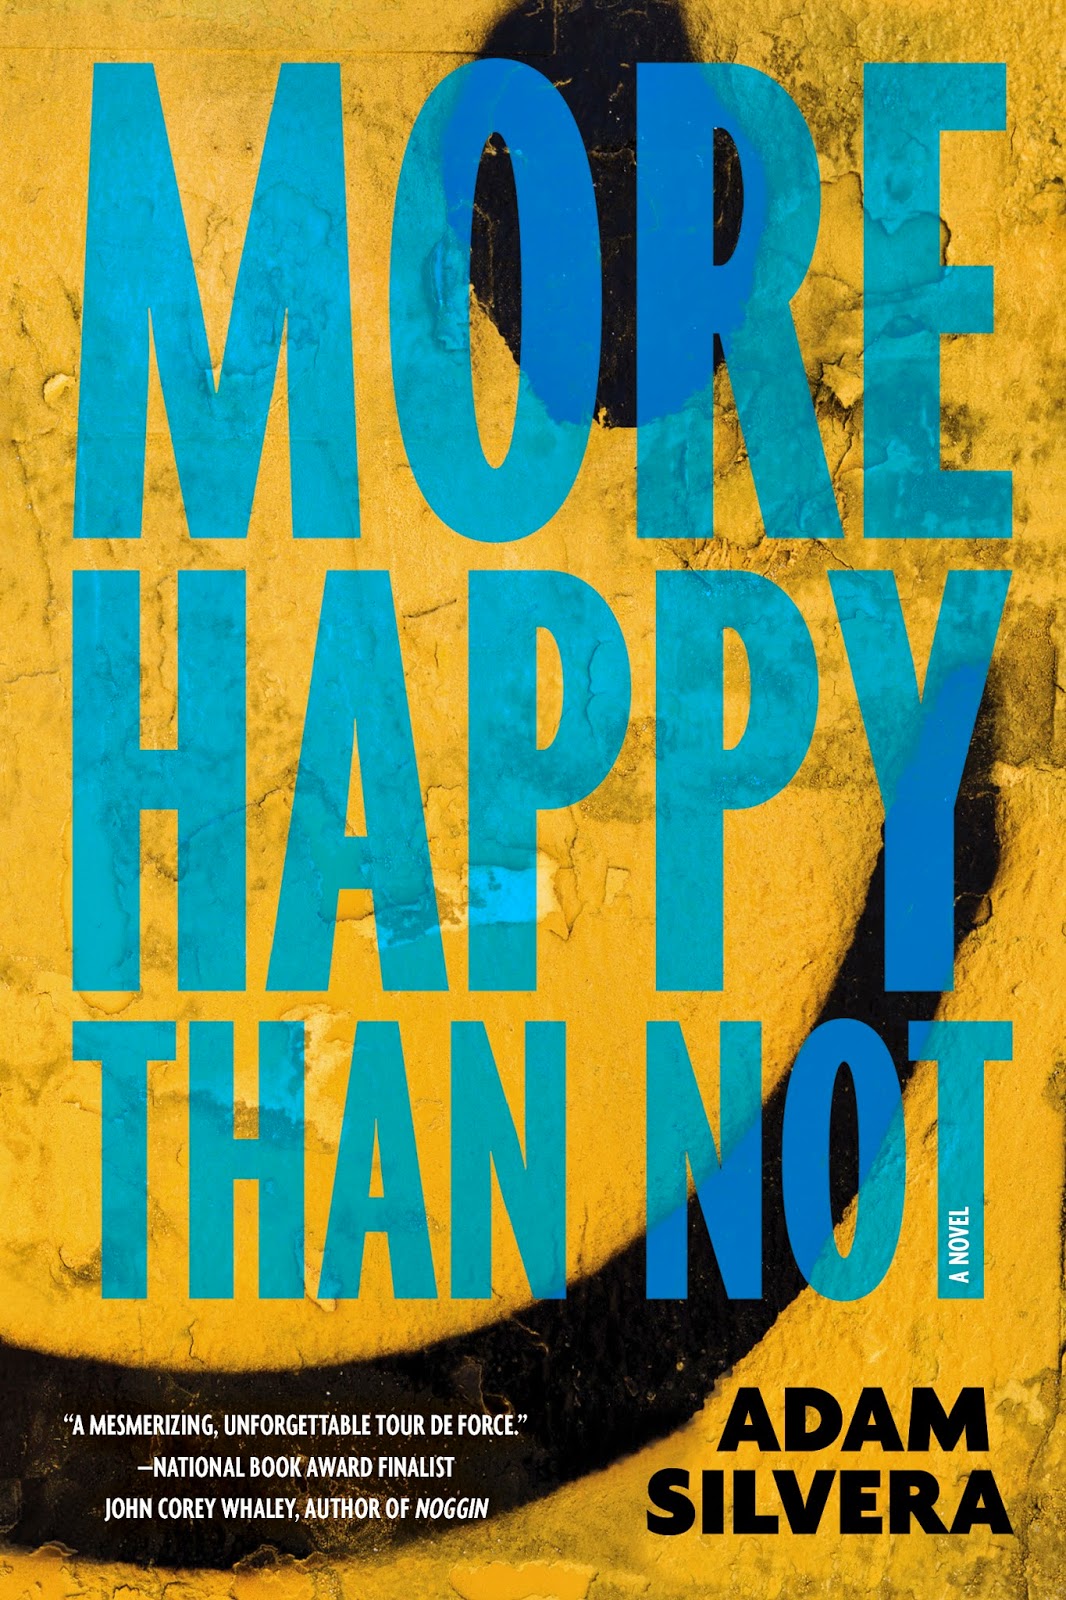 MORE HAPPY THAN NOT by Adam Silvera